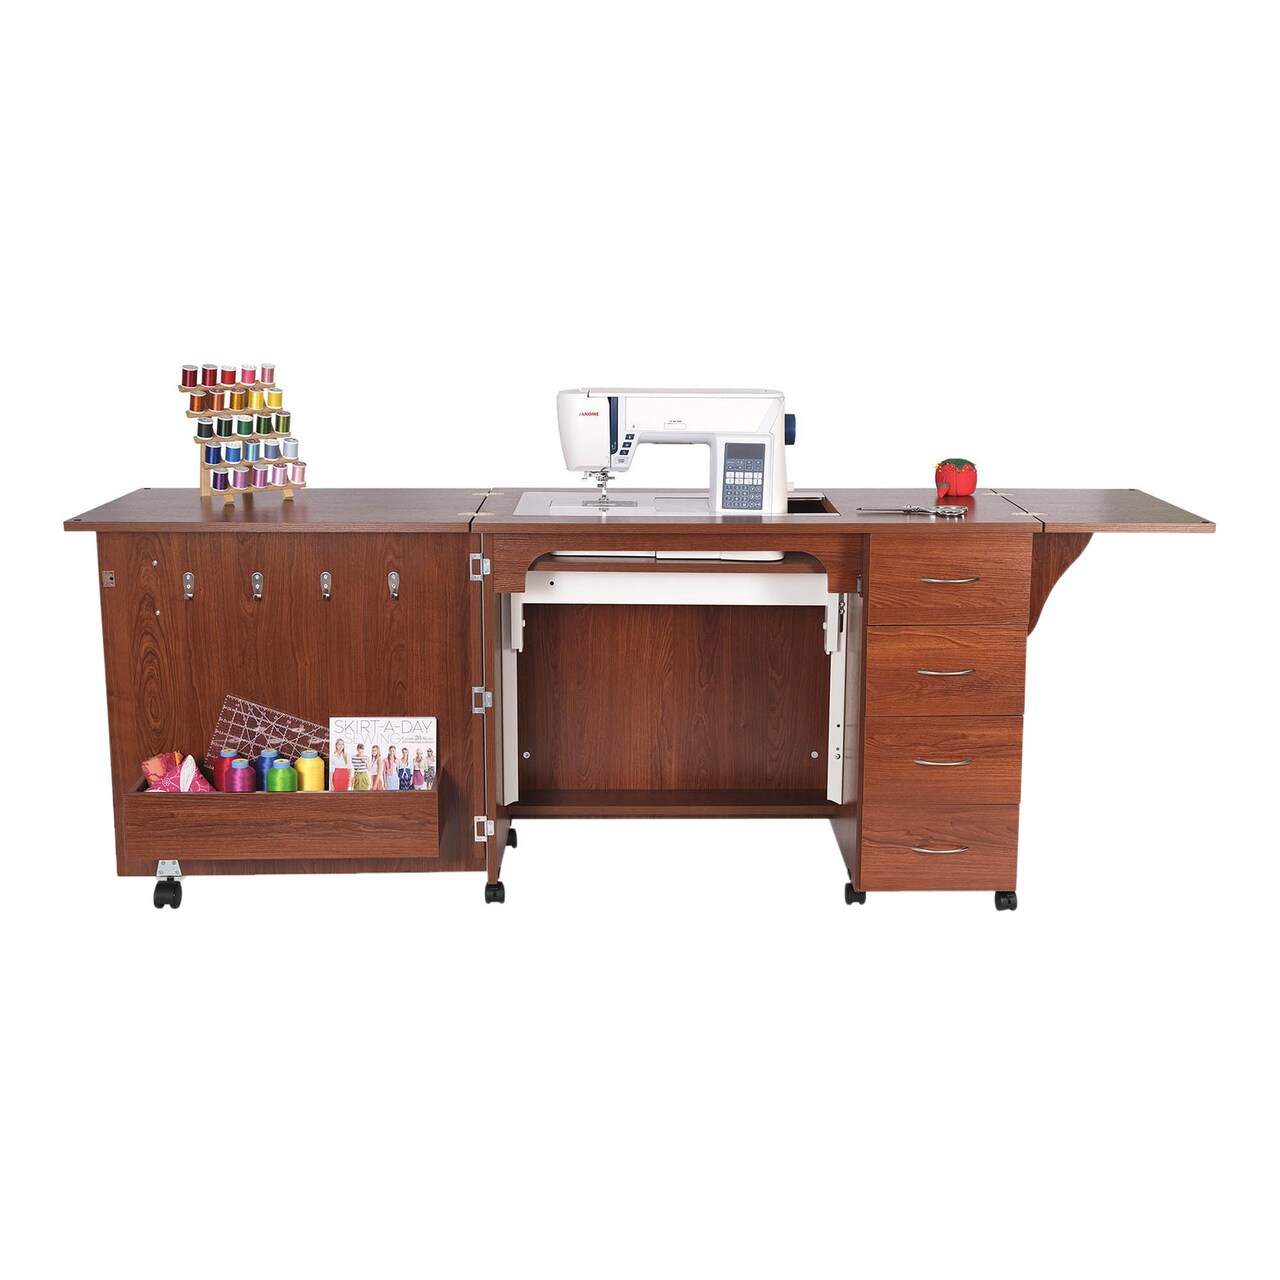 Arrow Classic Sewing Furniture Harriet Full-Size Sewing Cabinet with Hydraulic Machine Lift, Drawers, Expandable Leaves, Locking Wheels - Teak